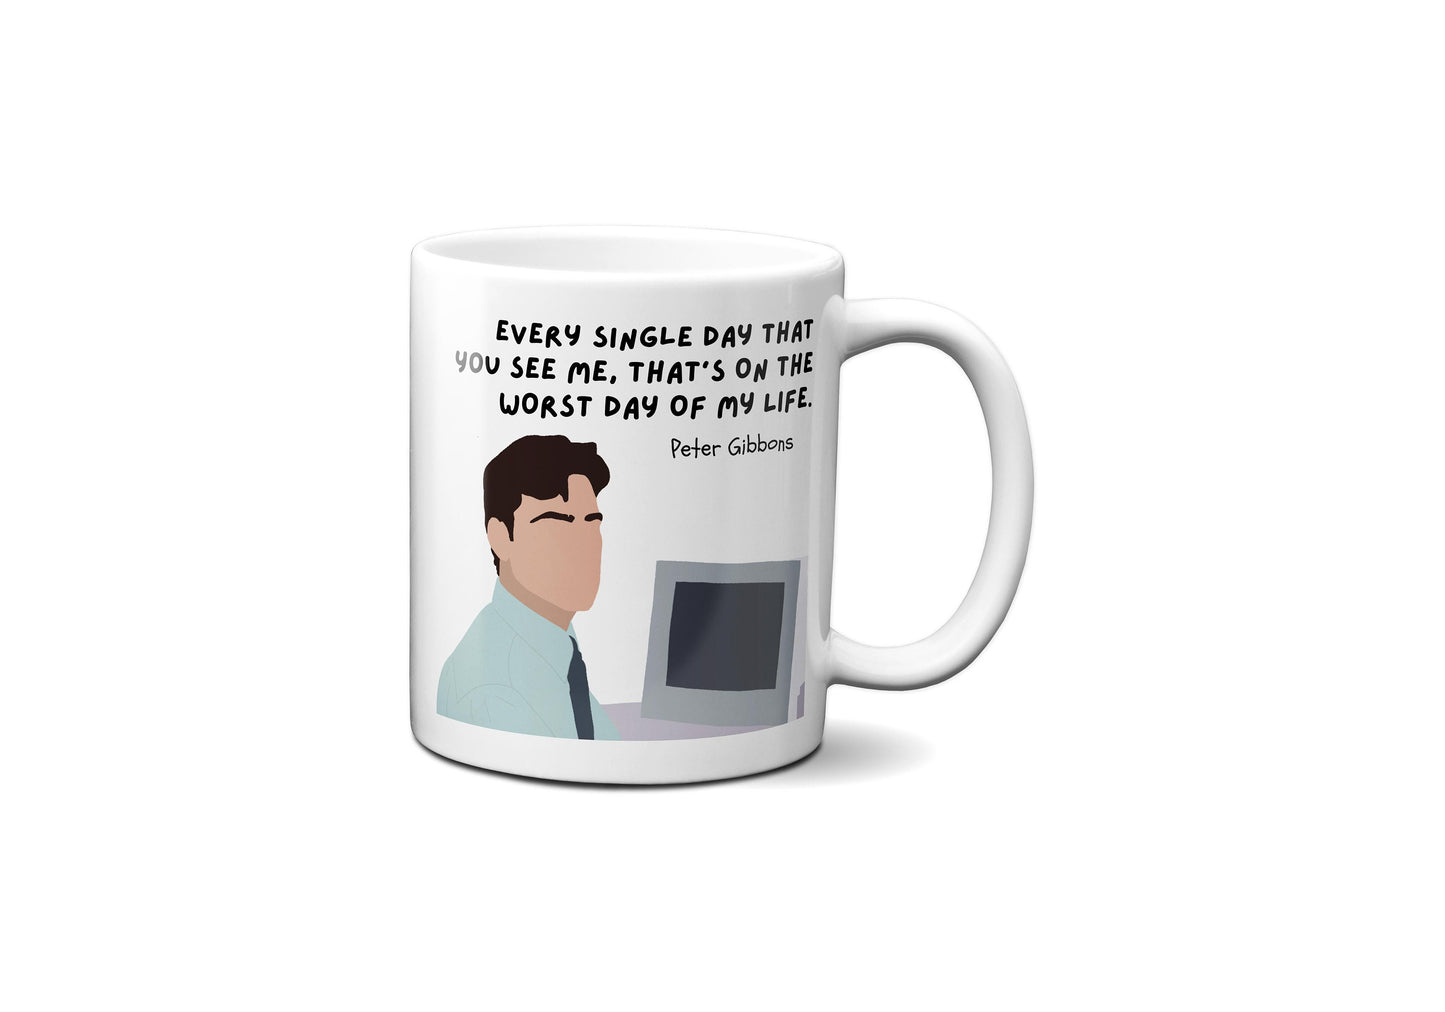 Every single day that you see me that's on the worst day of my life | Peter Gibbons Quote Mug | Office Space Mug